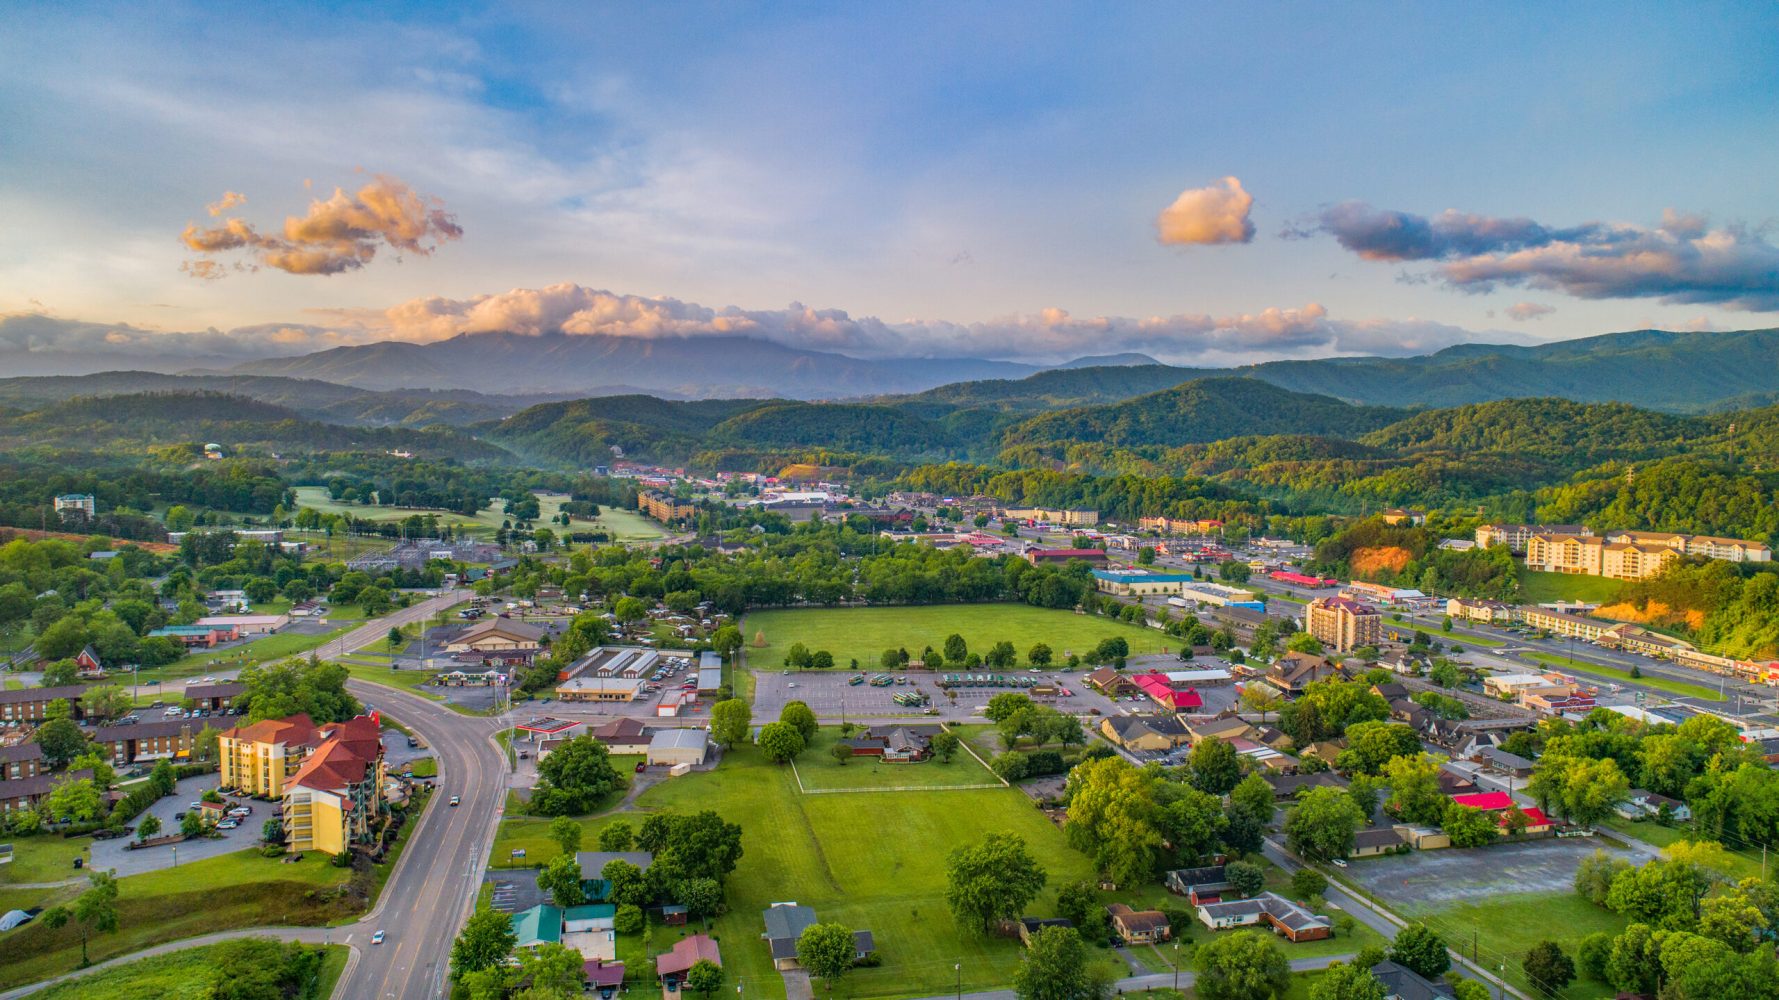 Pigeon Forge and Sevierville Tennessee at the foothills of the Great Smoky Mountains National Park.